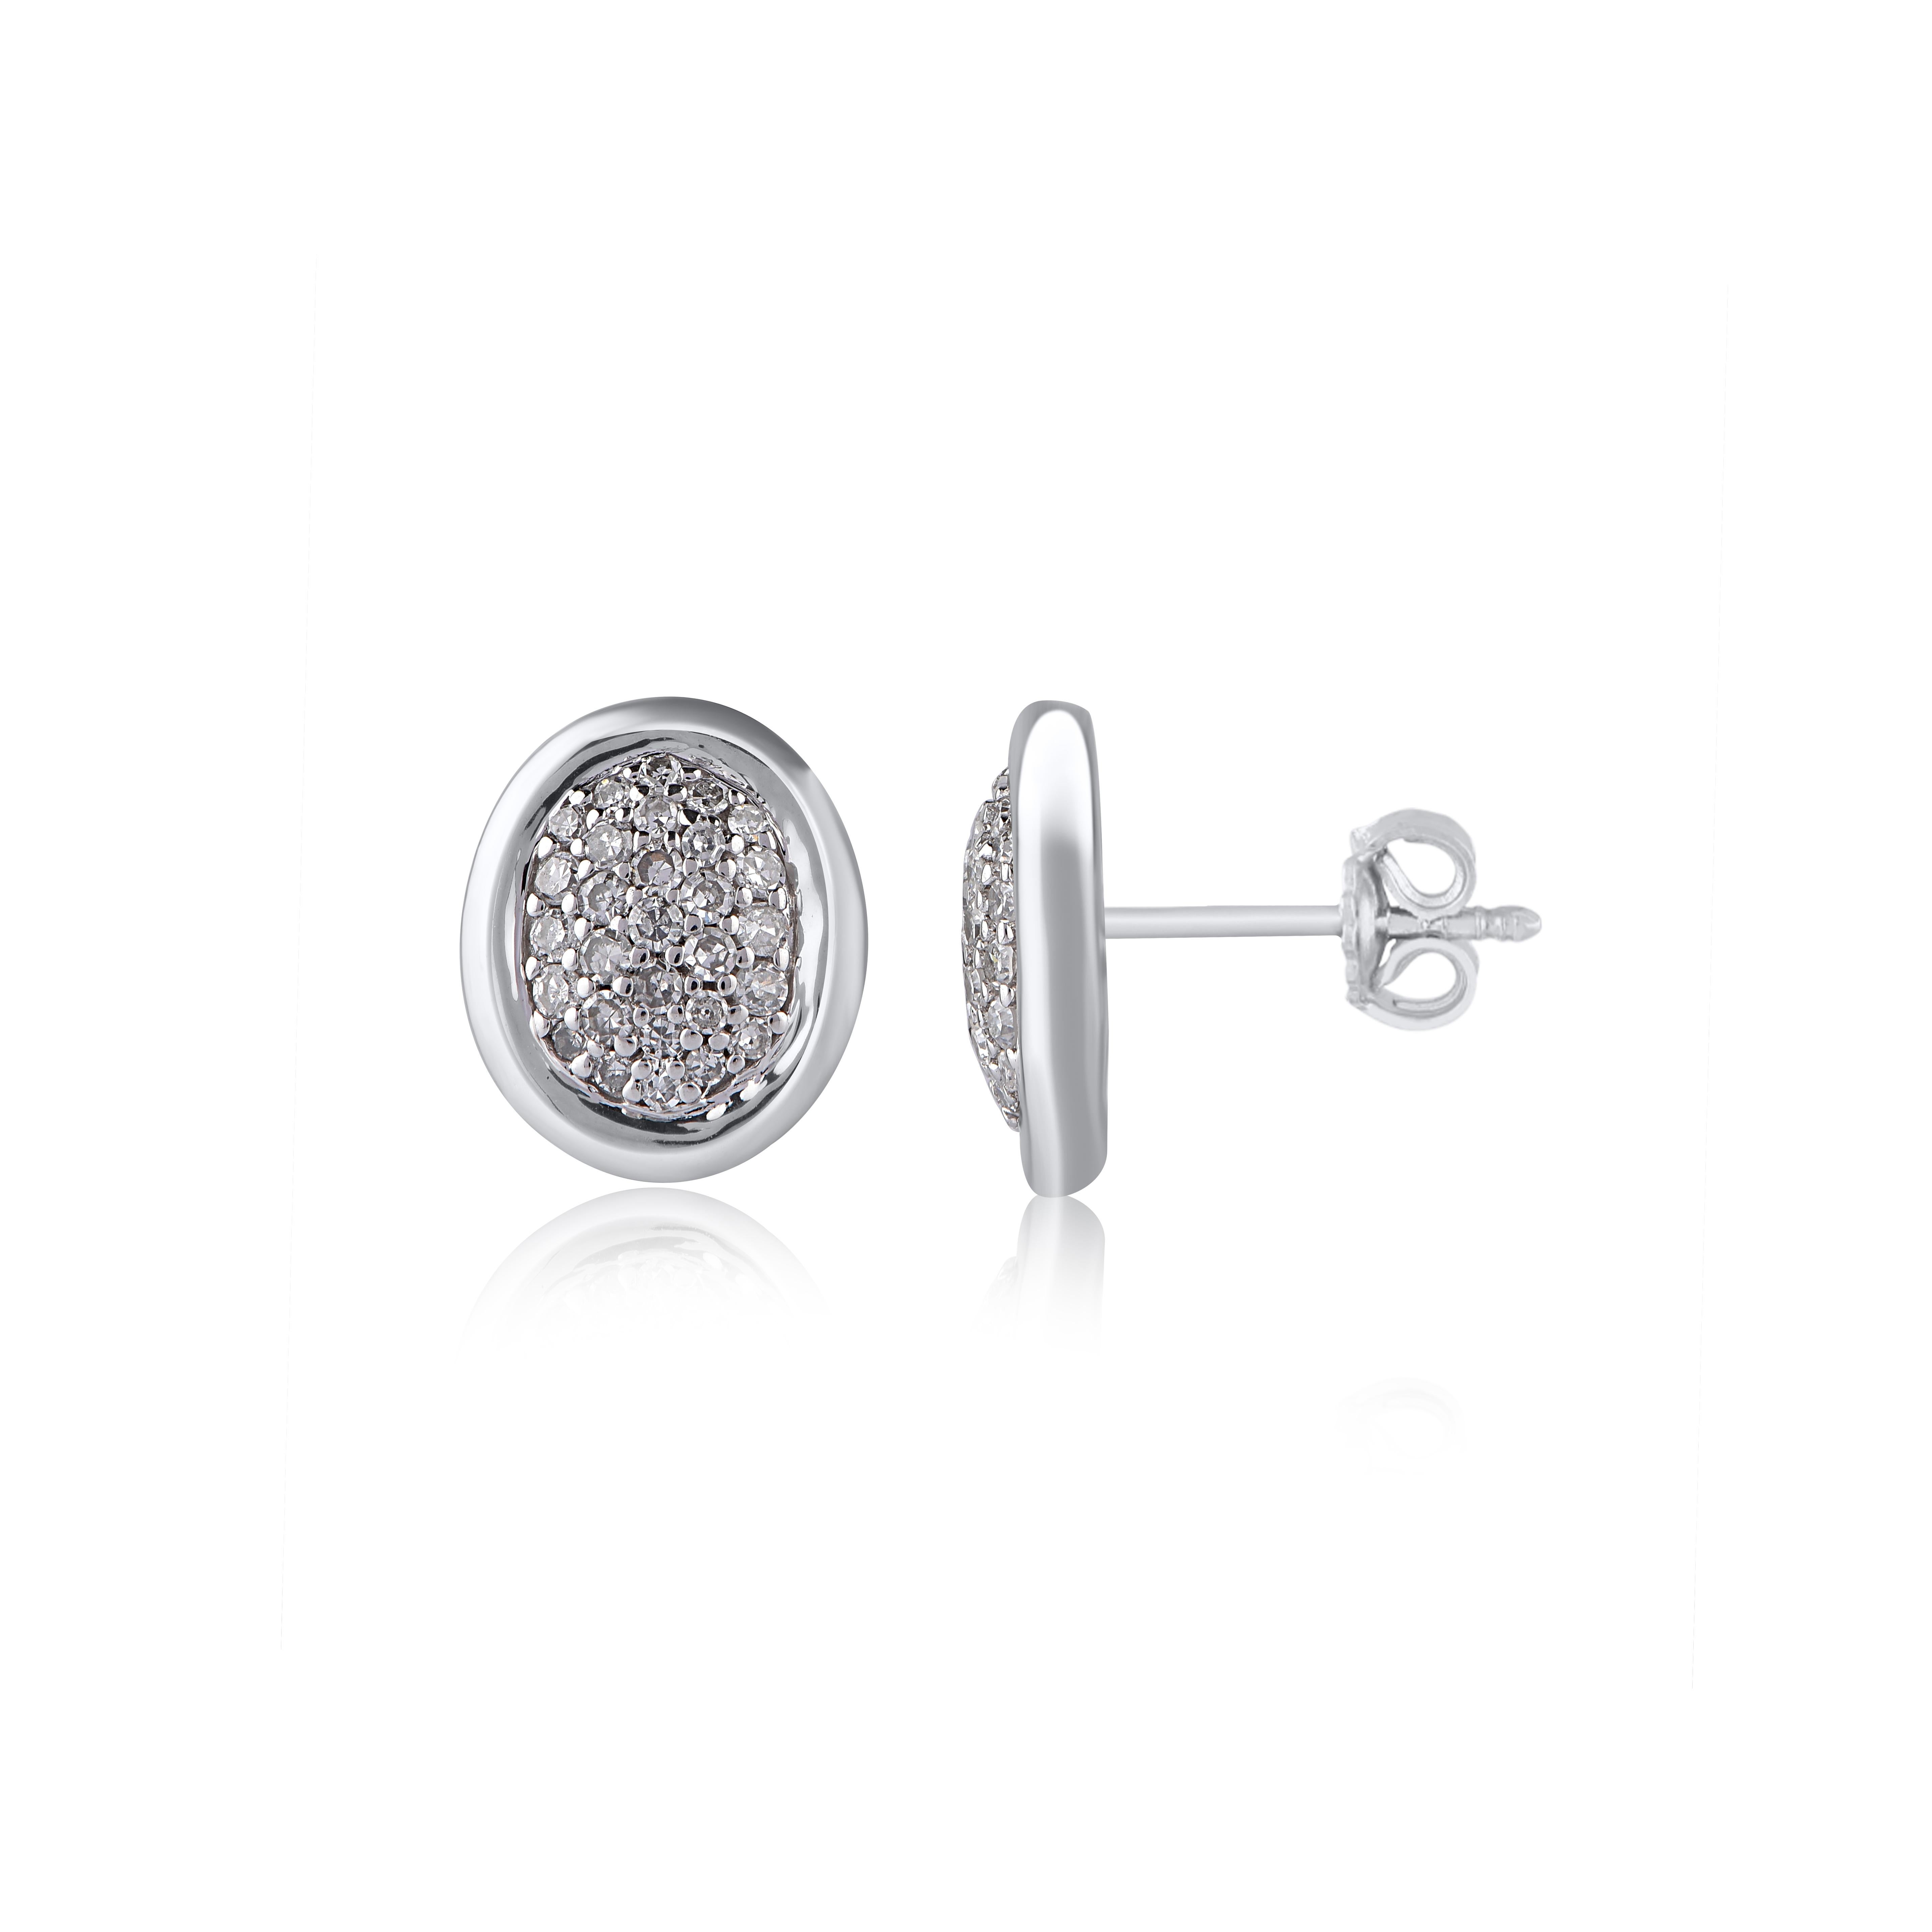 Adorn your formal wear with extra glitz when you put on these diamond stud earrings. Expertly crafted in 14K White Gold,  earring is cleverly filled with 58 round single cut diamonds. A bright polished shine, these sparkling post earrings secure